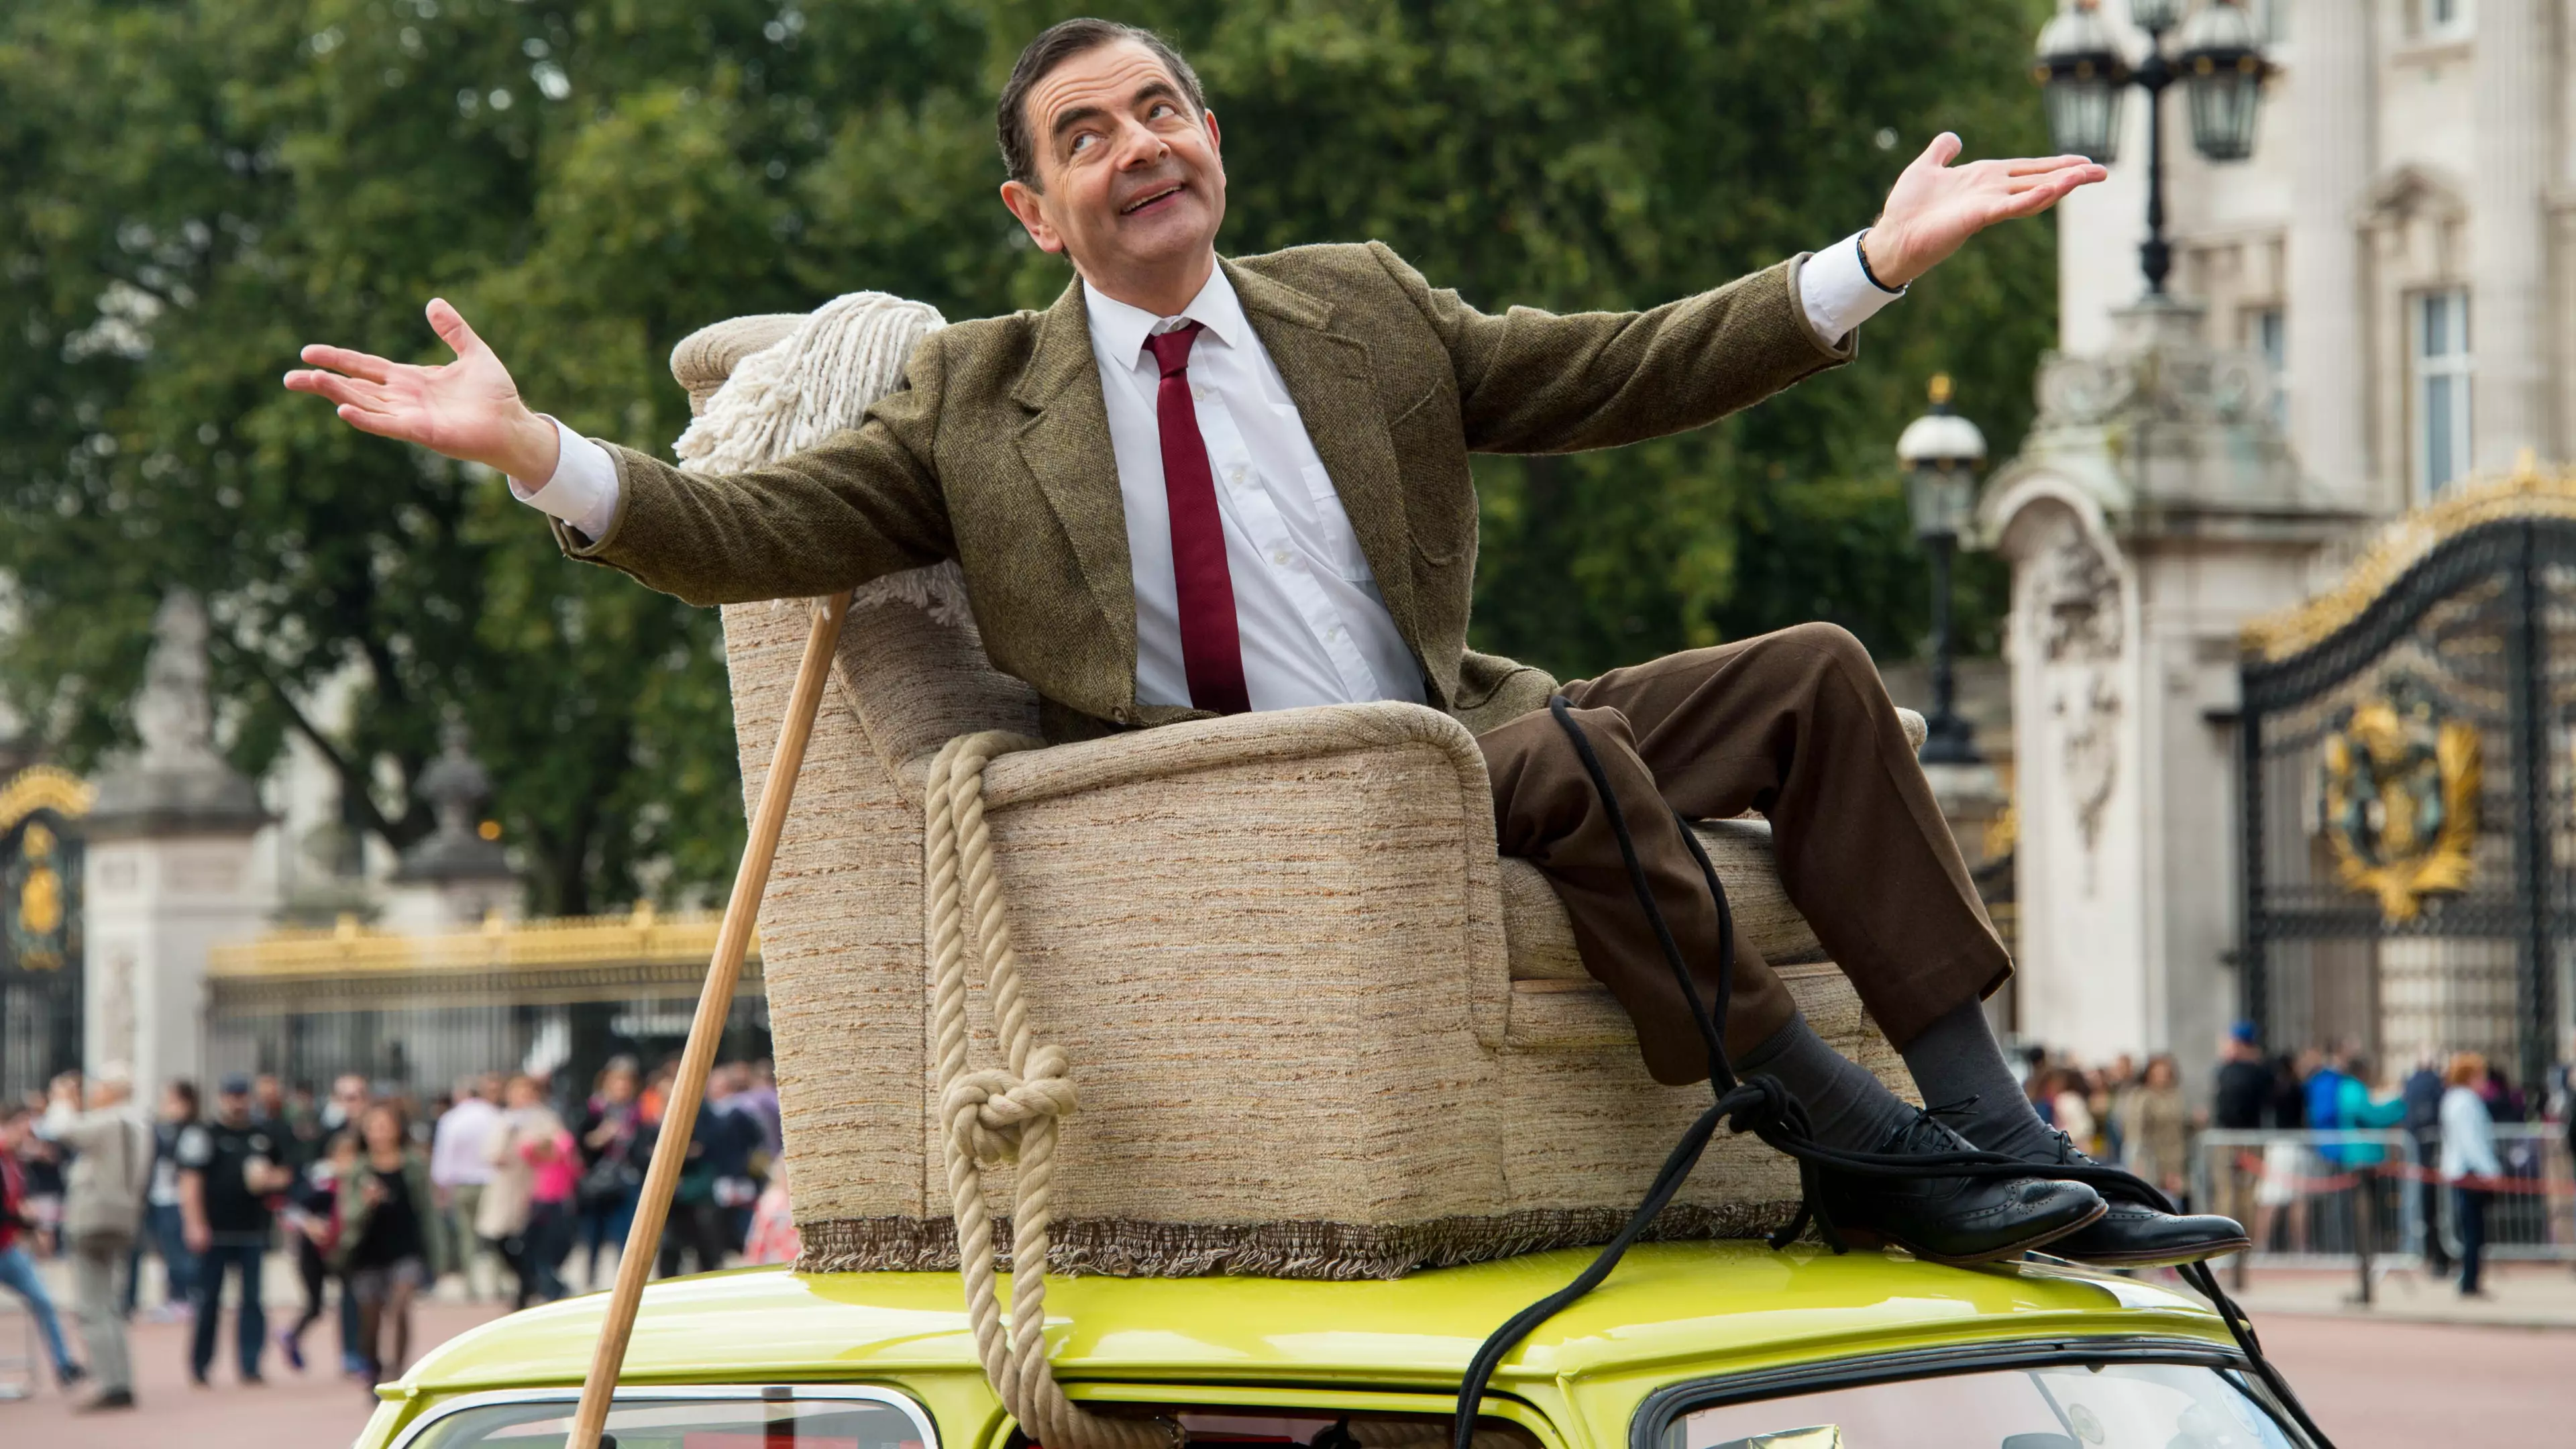 Mr Bean Has Made A Welcome Return To The Big Screen